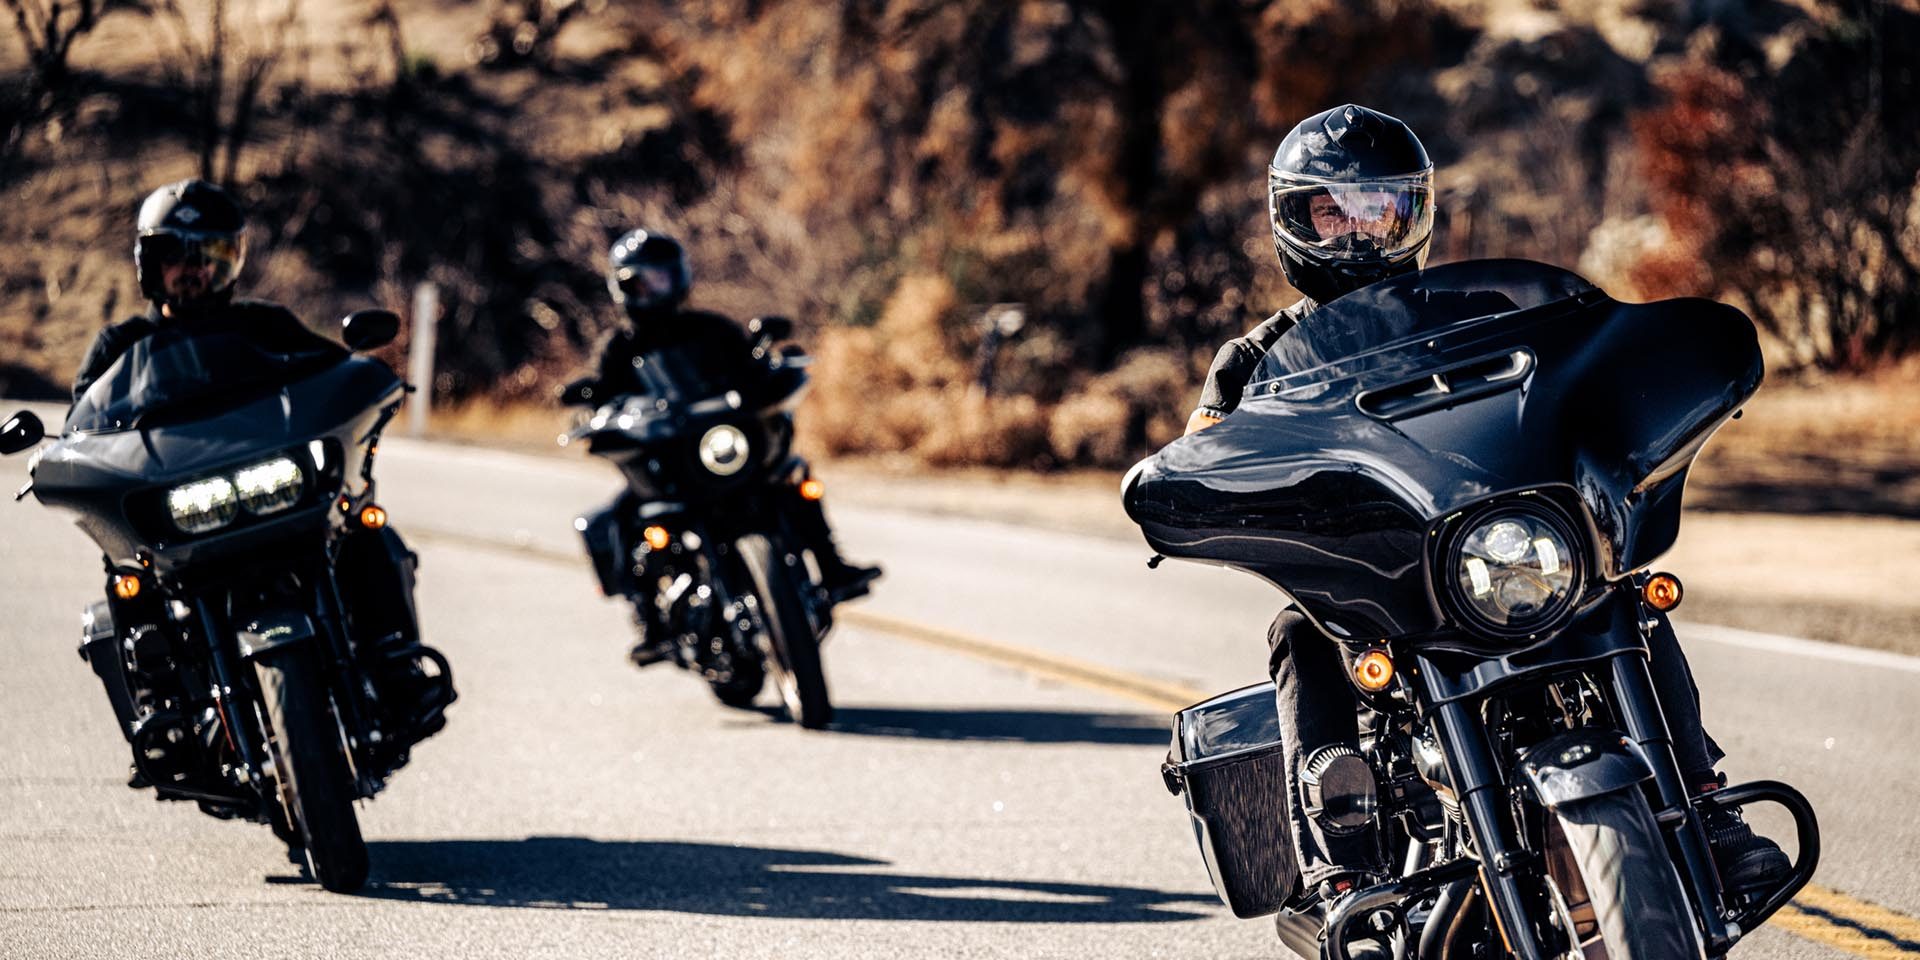 HarleyDavidson Event and Challenge Announced Gone Touring